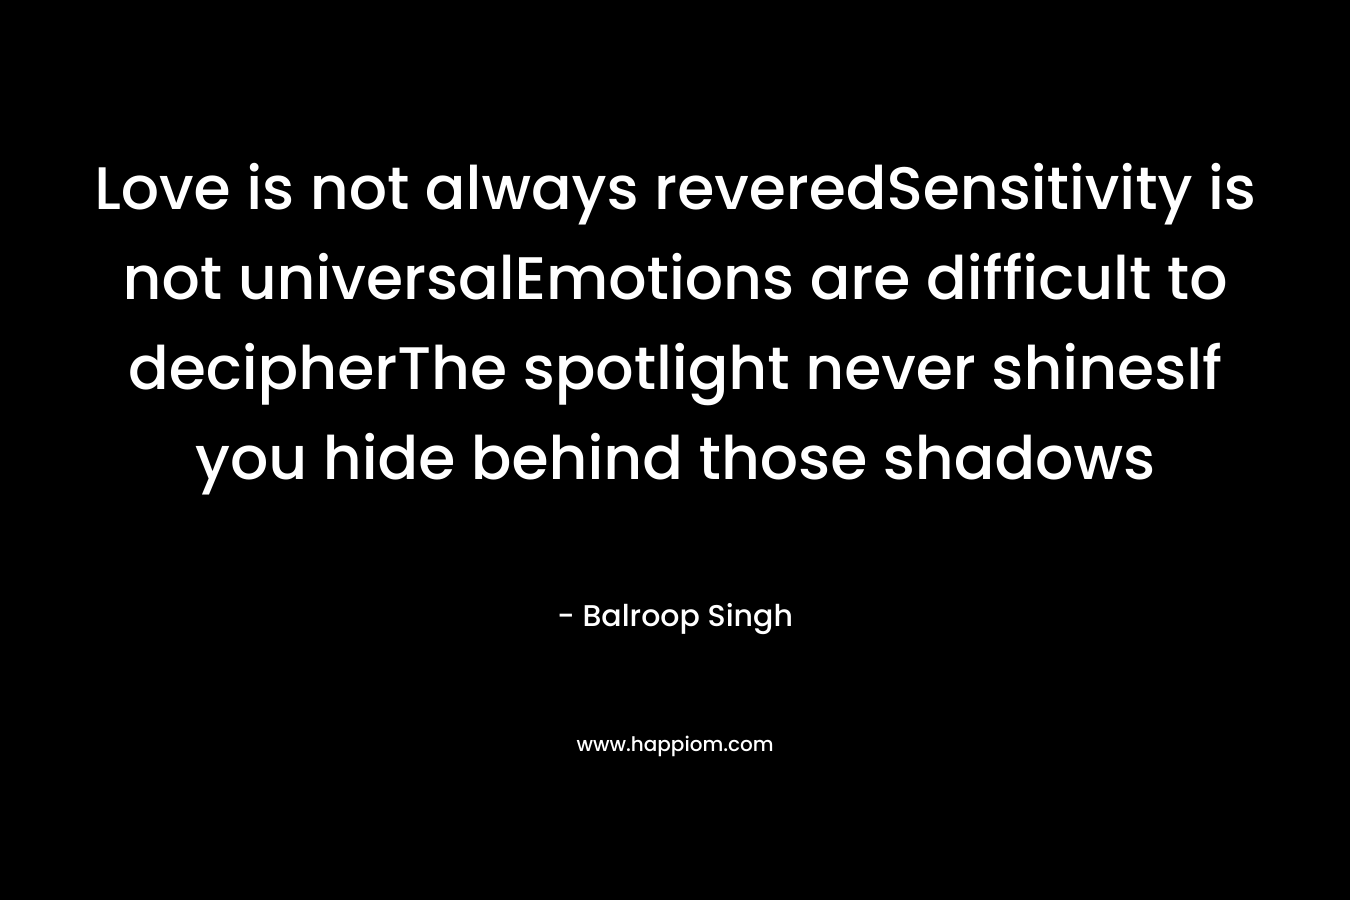 Love is not always reveredSensitivity is not universalEmotions are difficult to decipherThe spotlight never shinesIf you hide behind those shadows – Balroop Singh